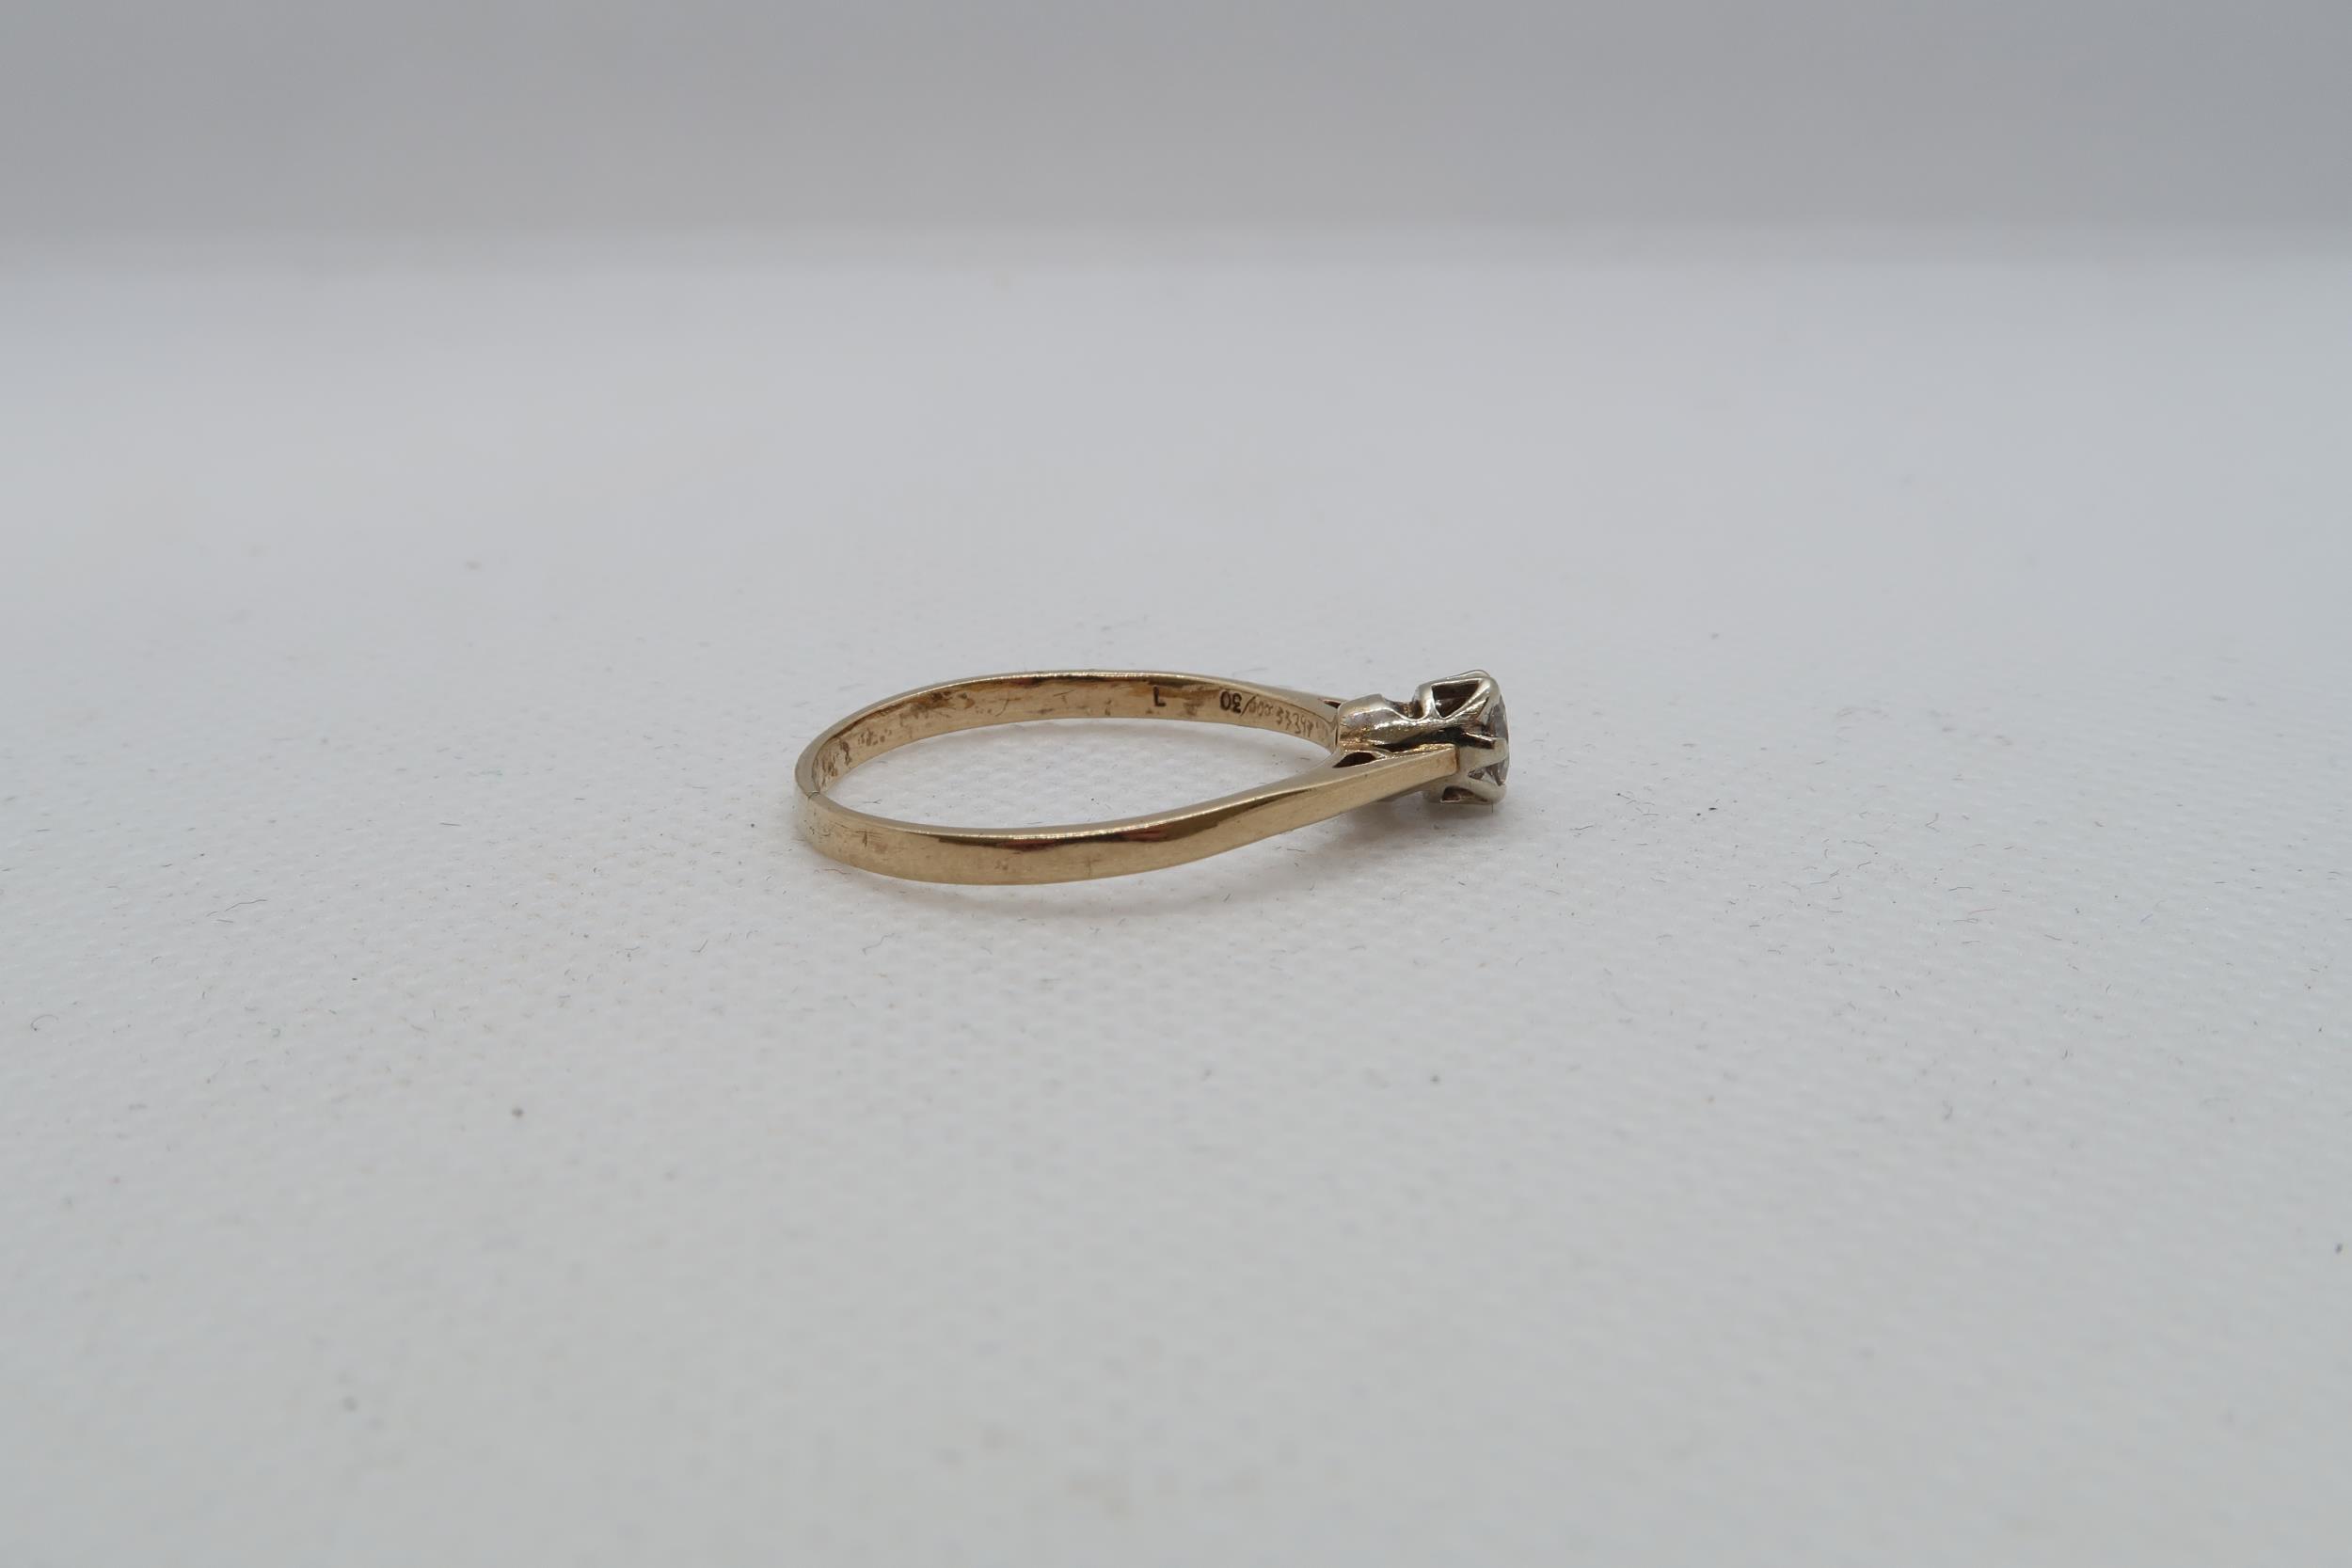 A 9ct yellow gold 0.30ct diamond ring - carat weight marked on inside of ring - ring size approx S - Image 2 of 4